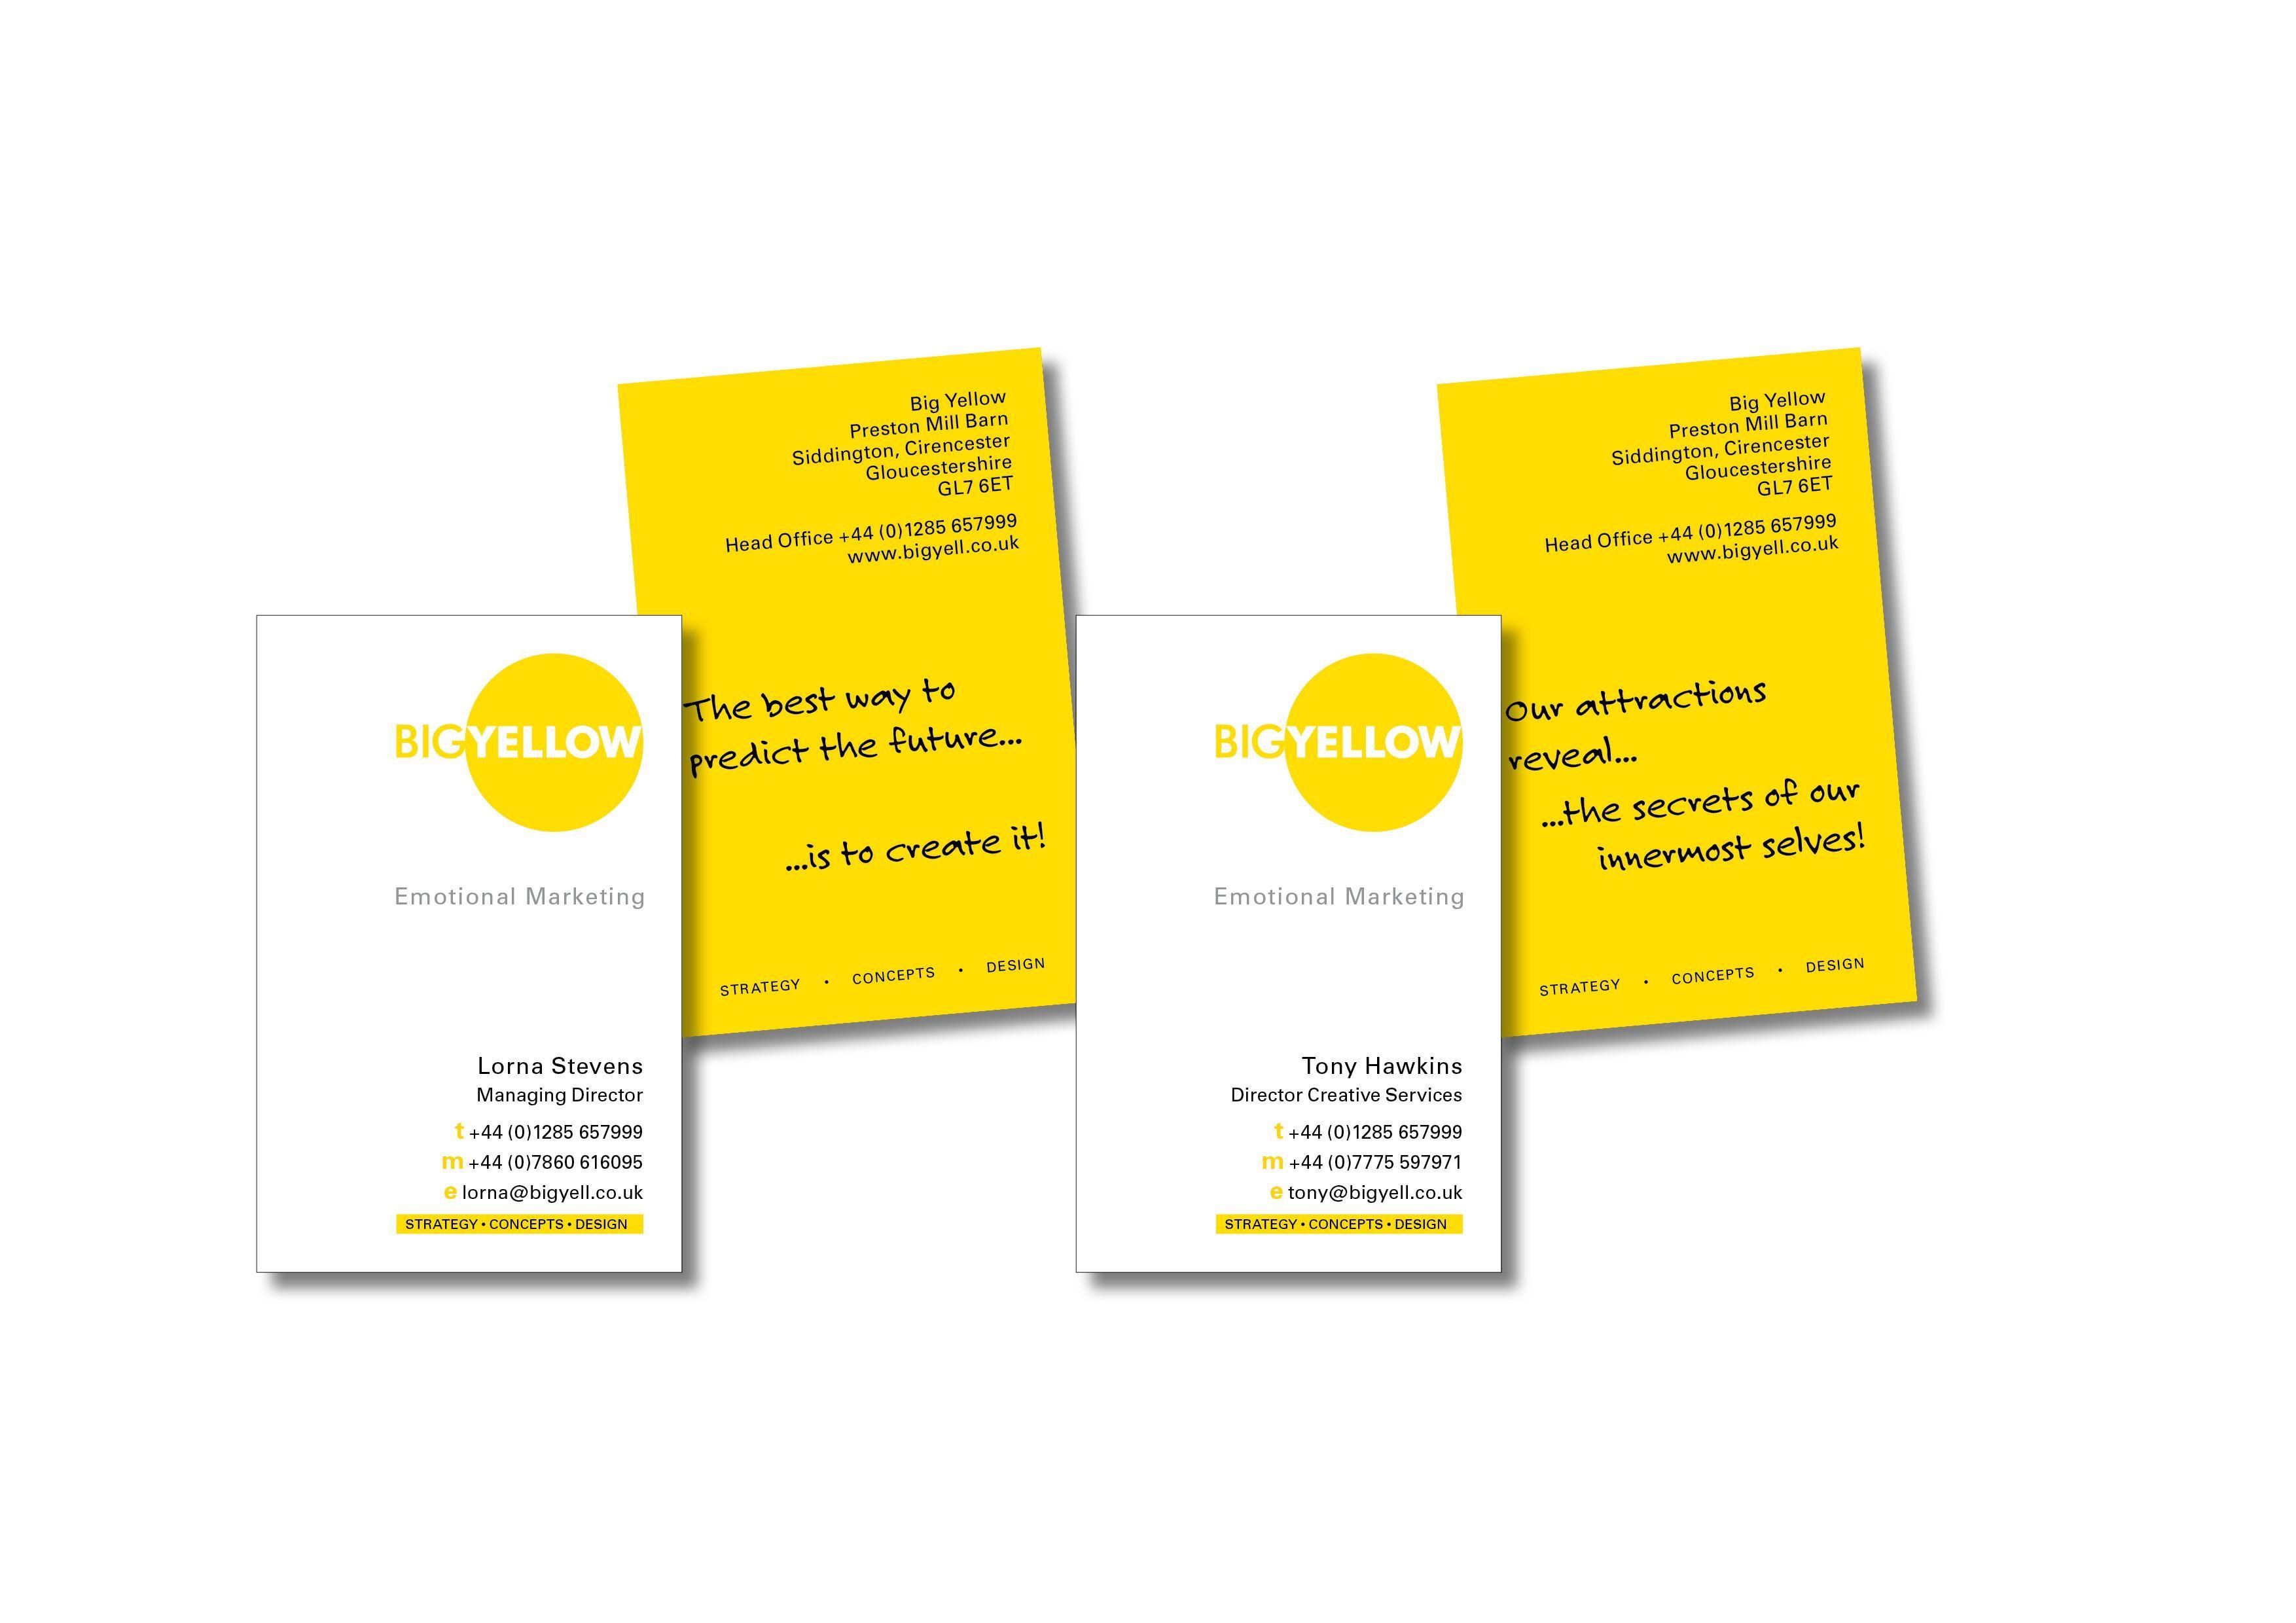 Big Yellow M Logo - BusinessCards for Big Yellow....Give us a shout if you need a NEW ...